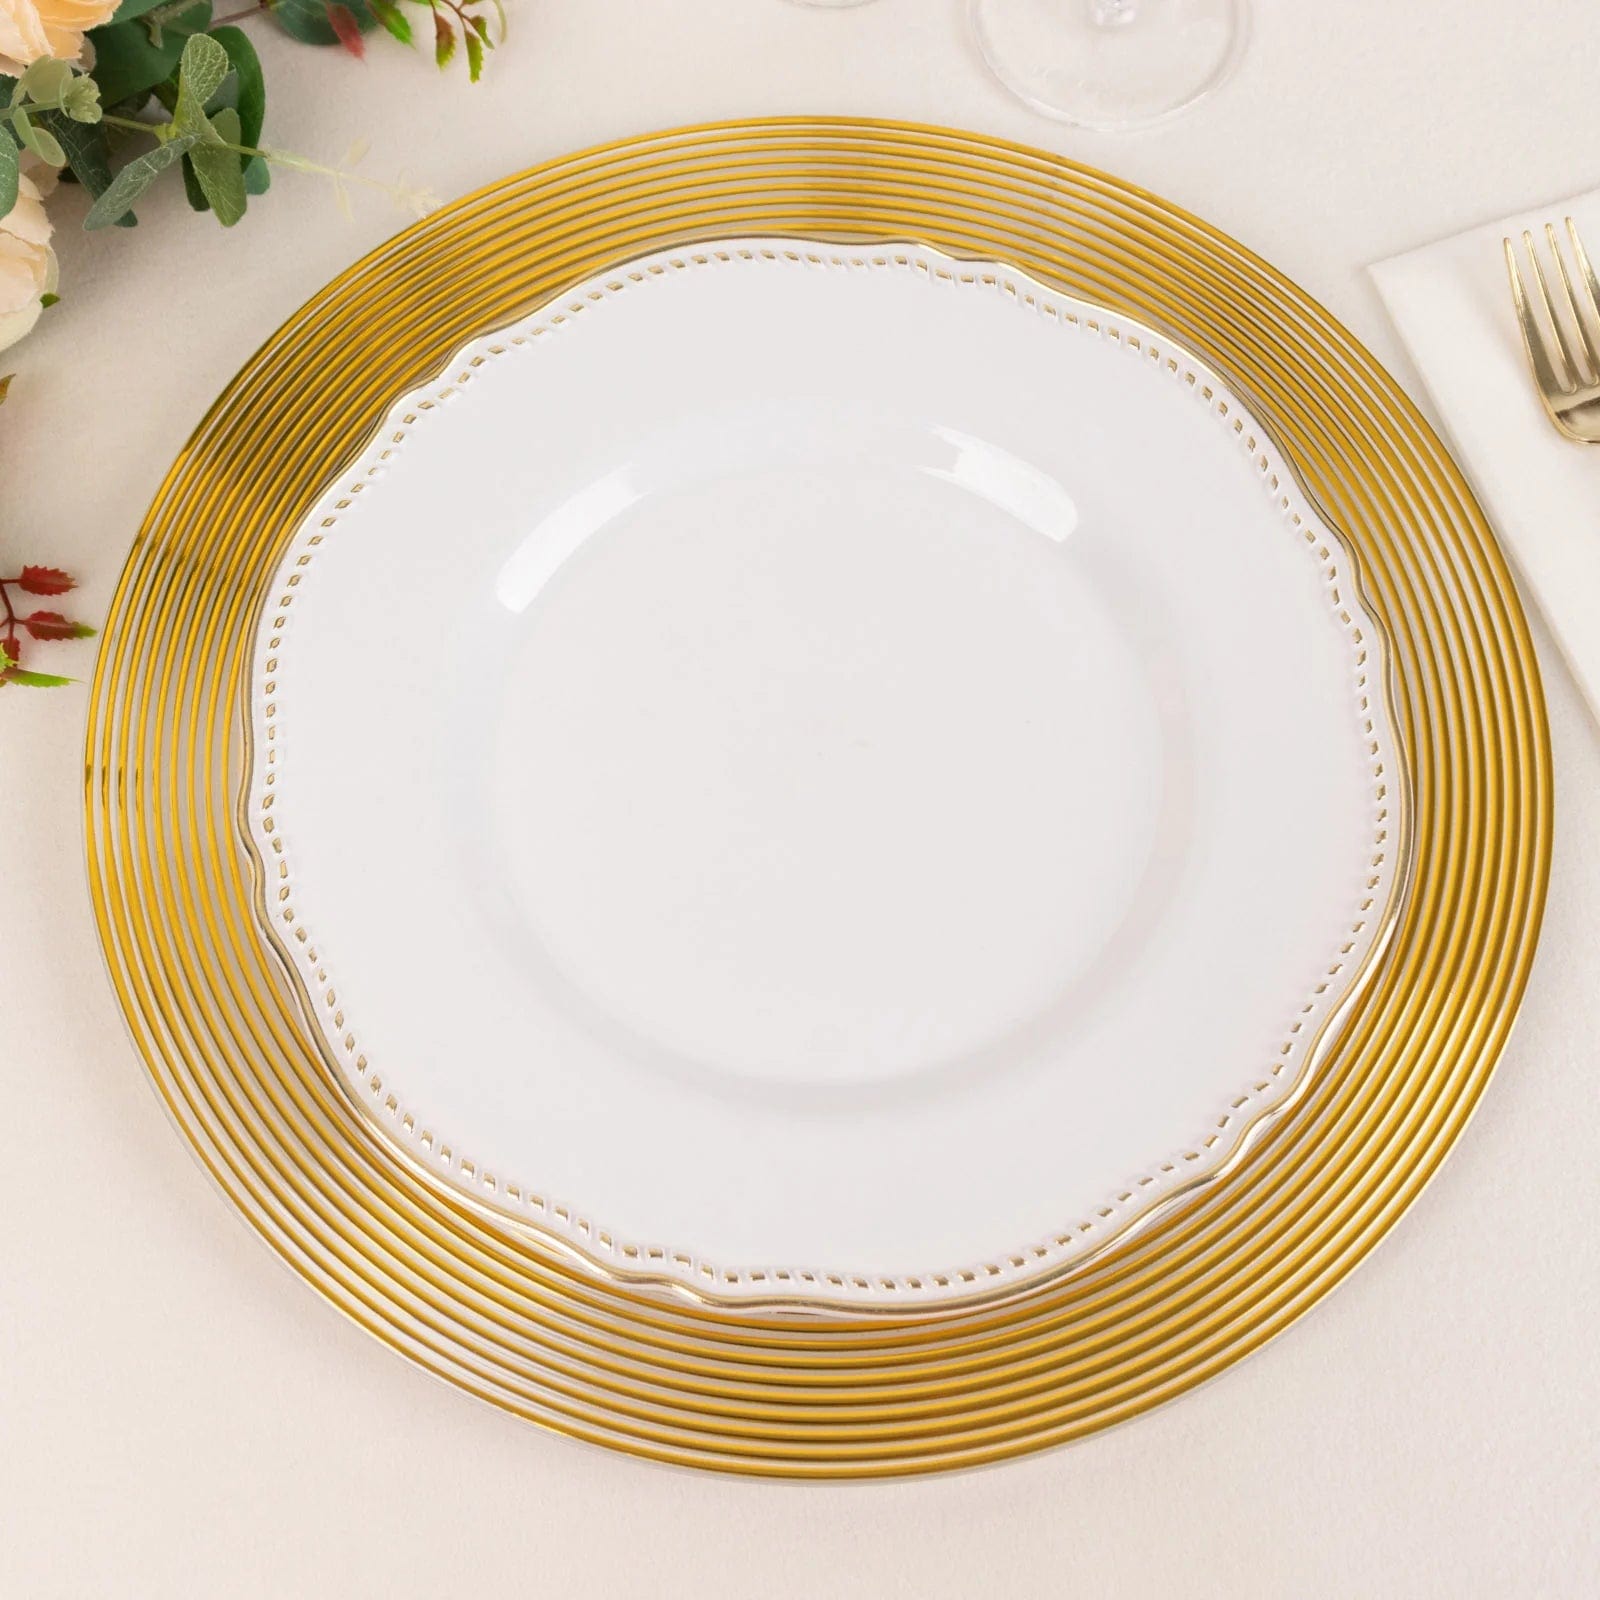 How To Use Charger Plates for Your Table Settings | Leilani Wholesale ...